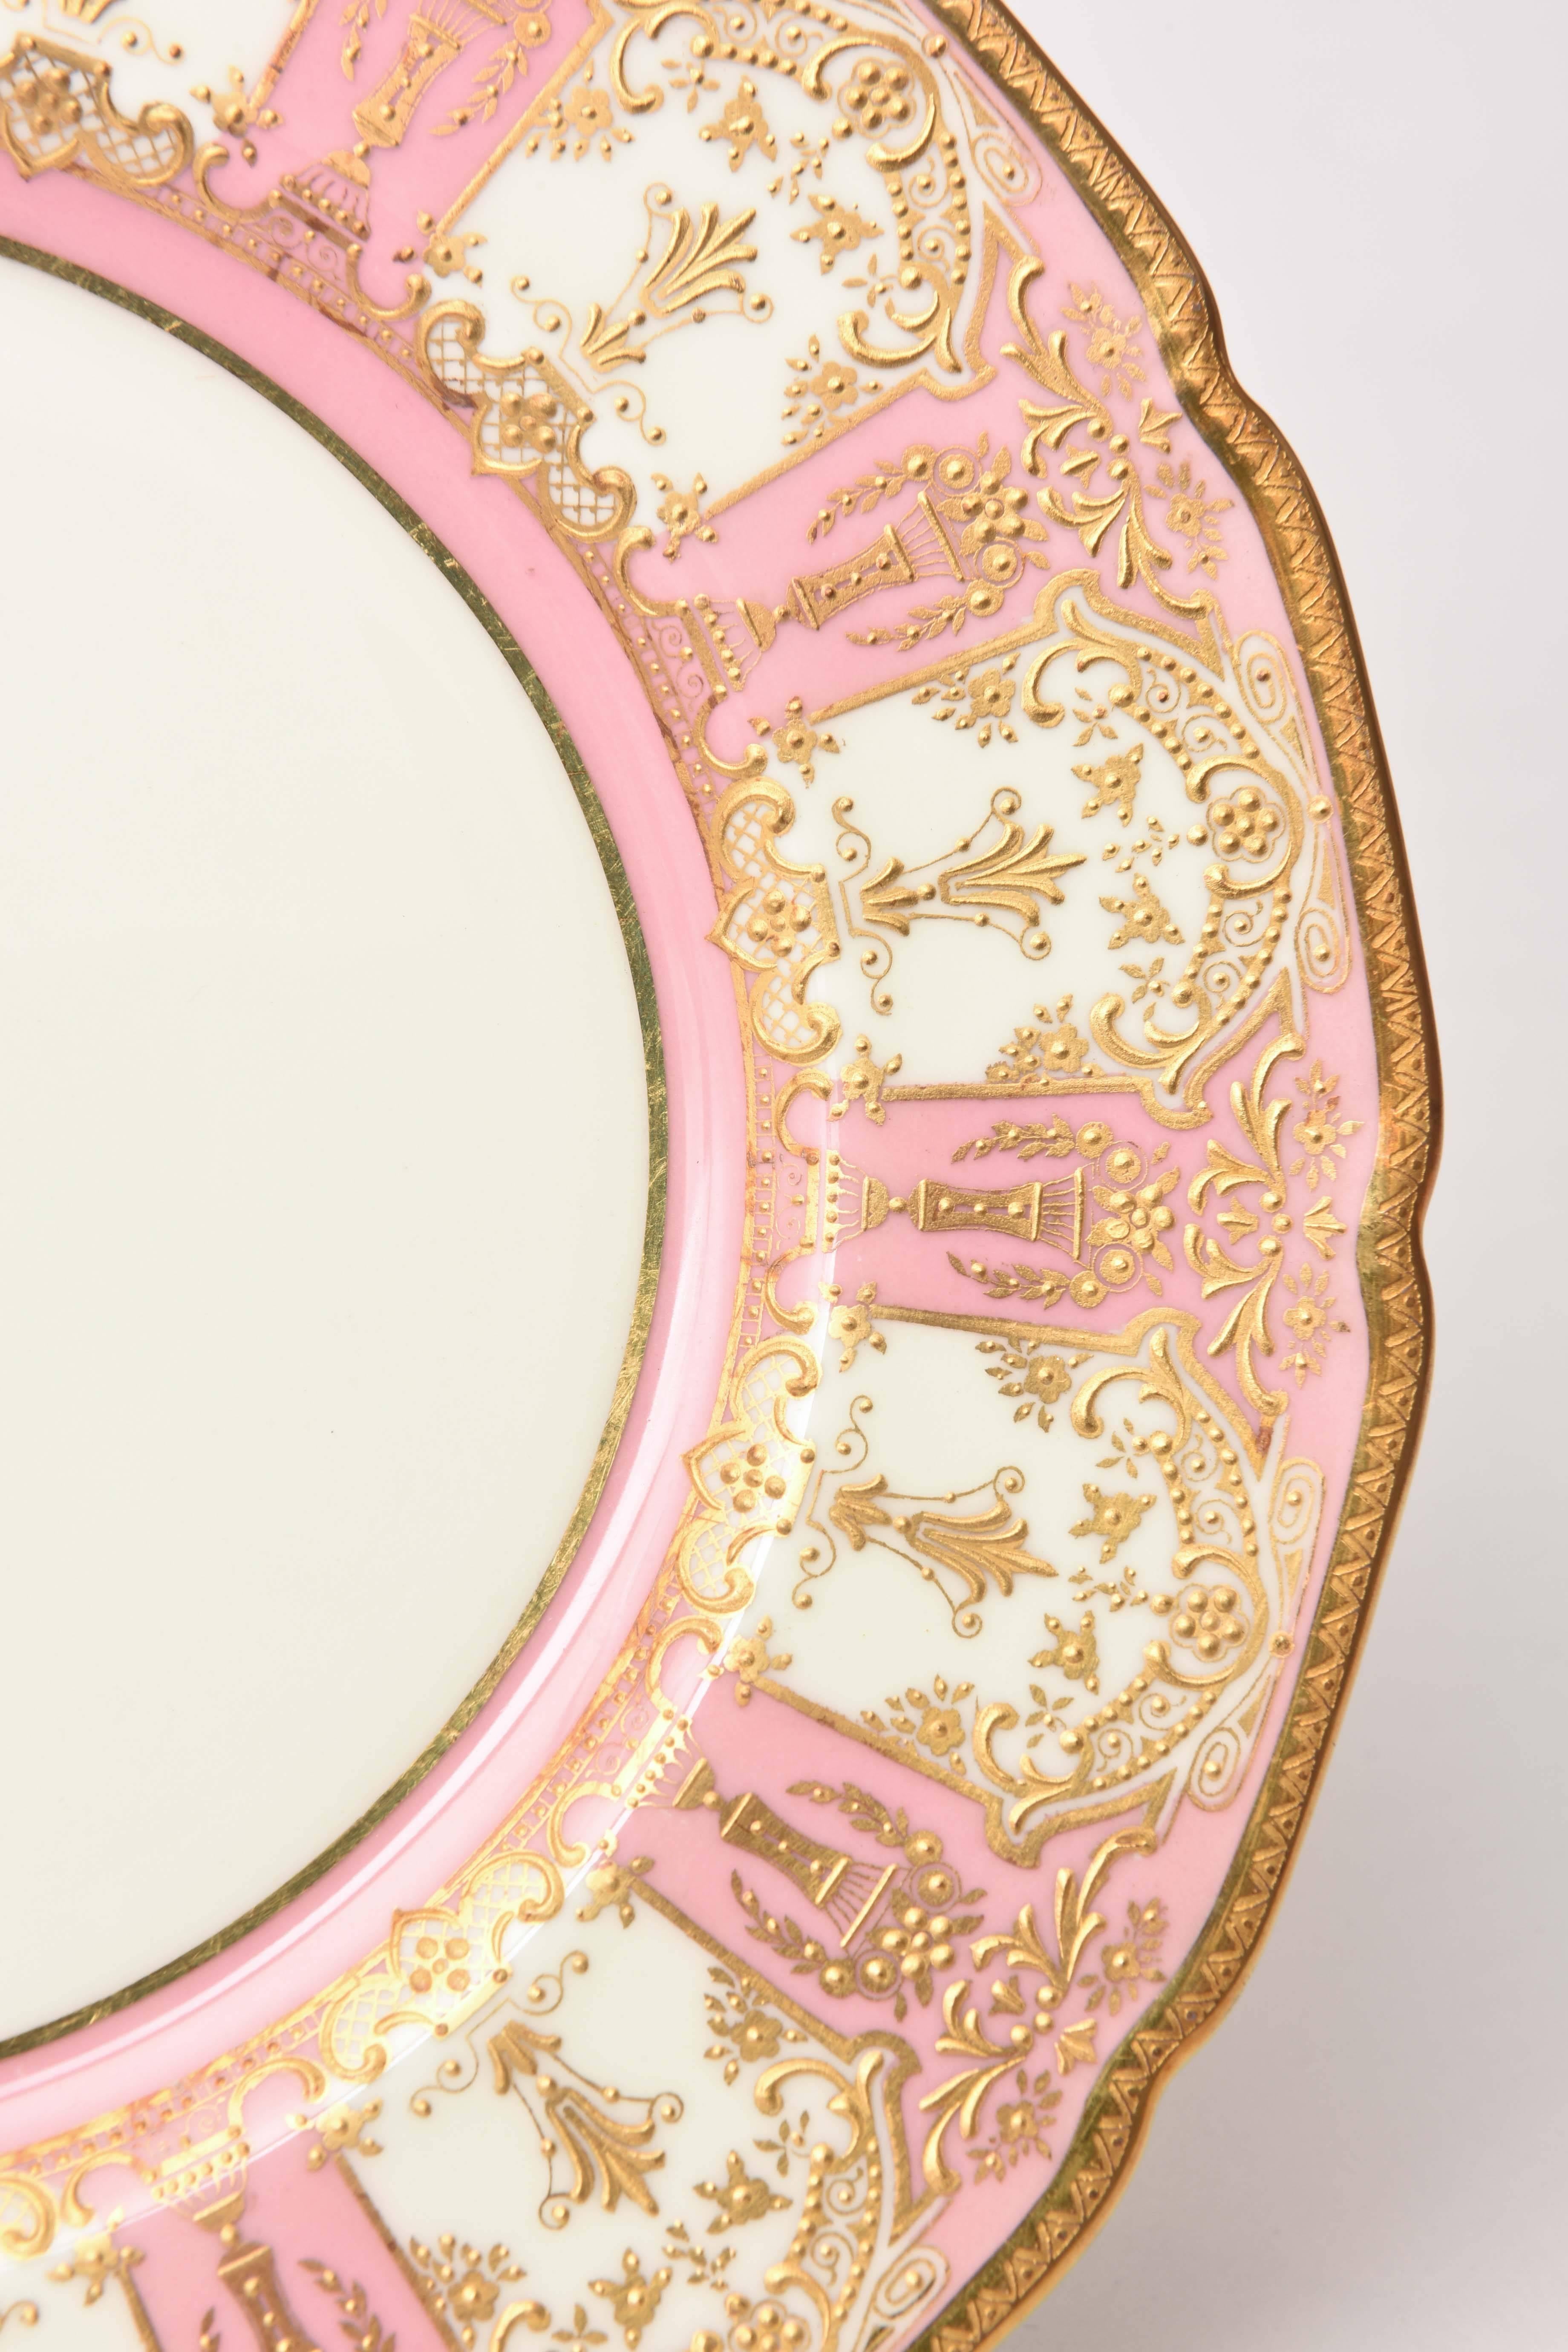 Retailed through Tiffany, here is one of our favorite sets of antique plates by Royal Doulton featuring their Classic shape. Detailed urn and floral raised paste gilding on a soft and pretty pink shoulder. Perfect for mixing and matching in with all